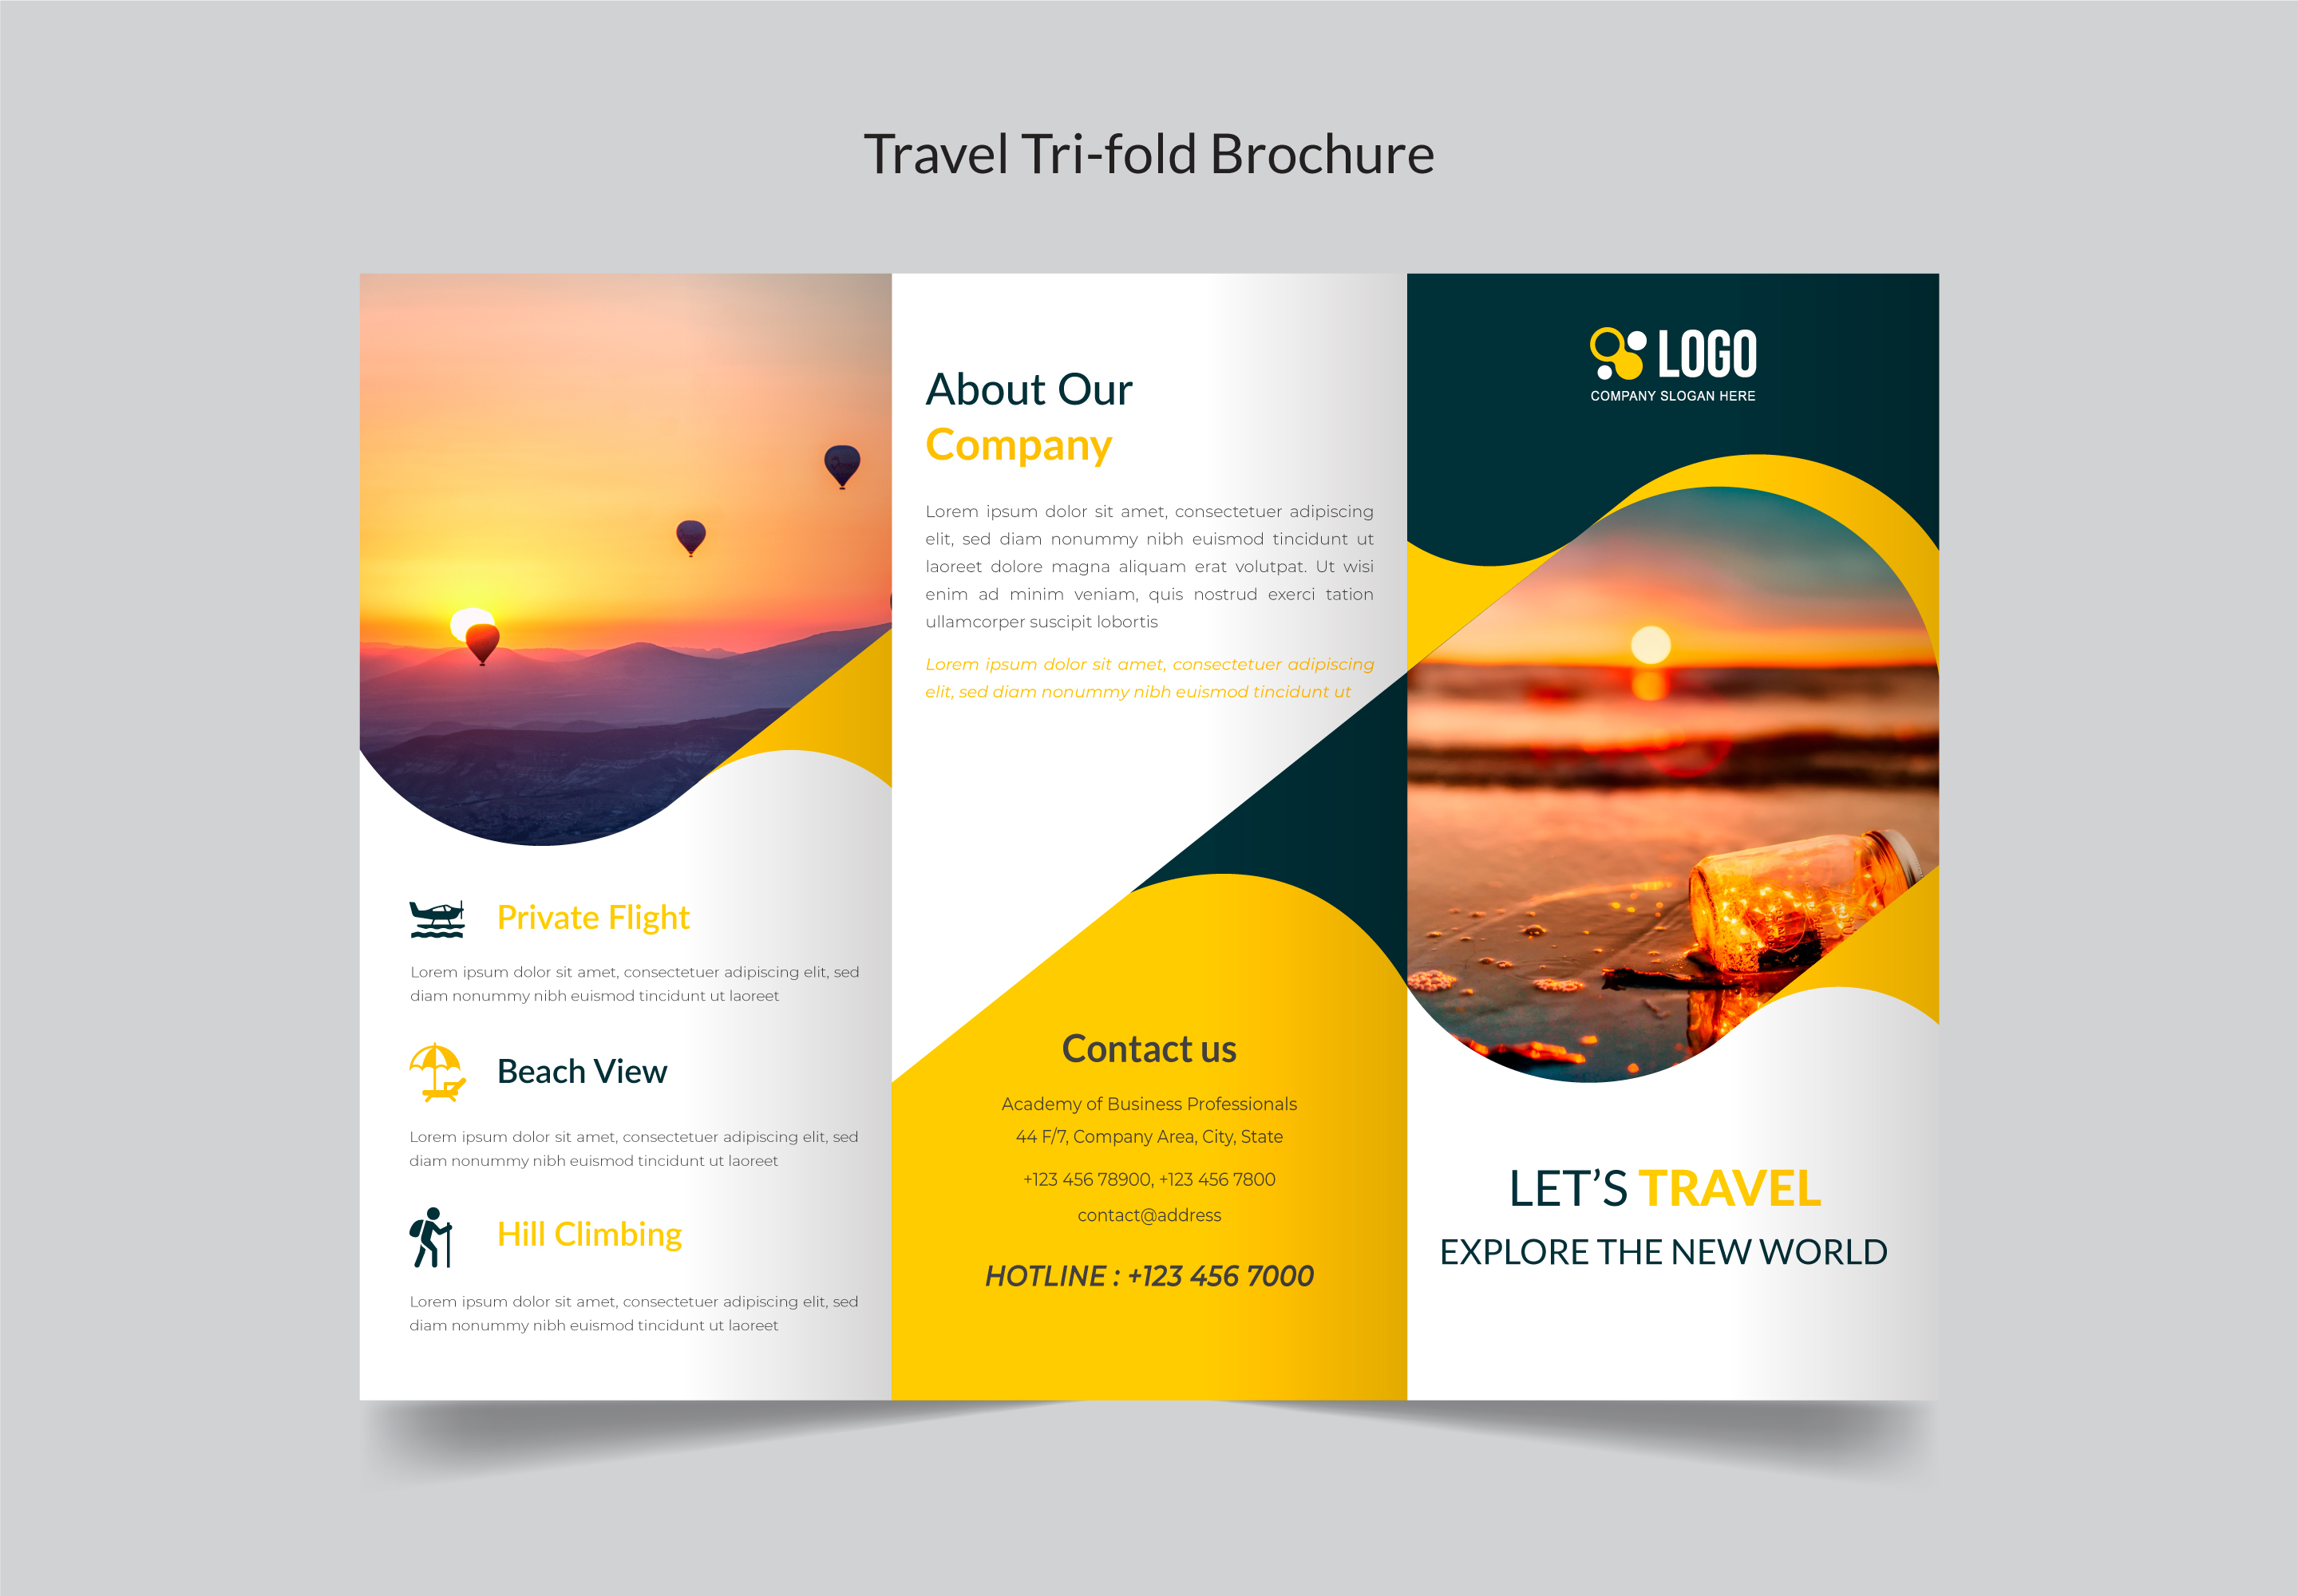 Tour And Travel Agency Tri Fold Brochure Graphics 8132913 1 